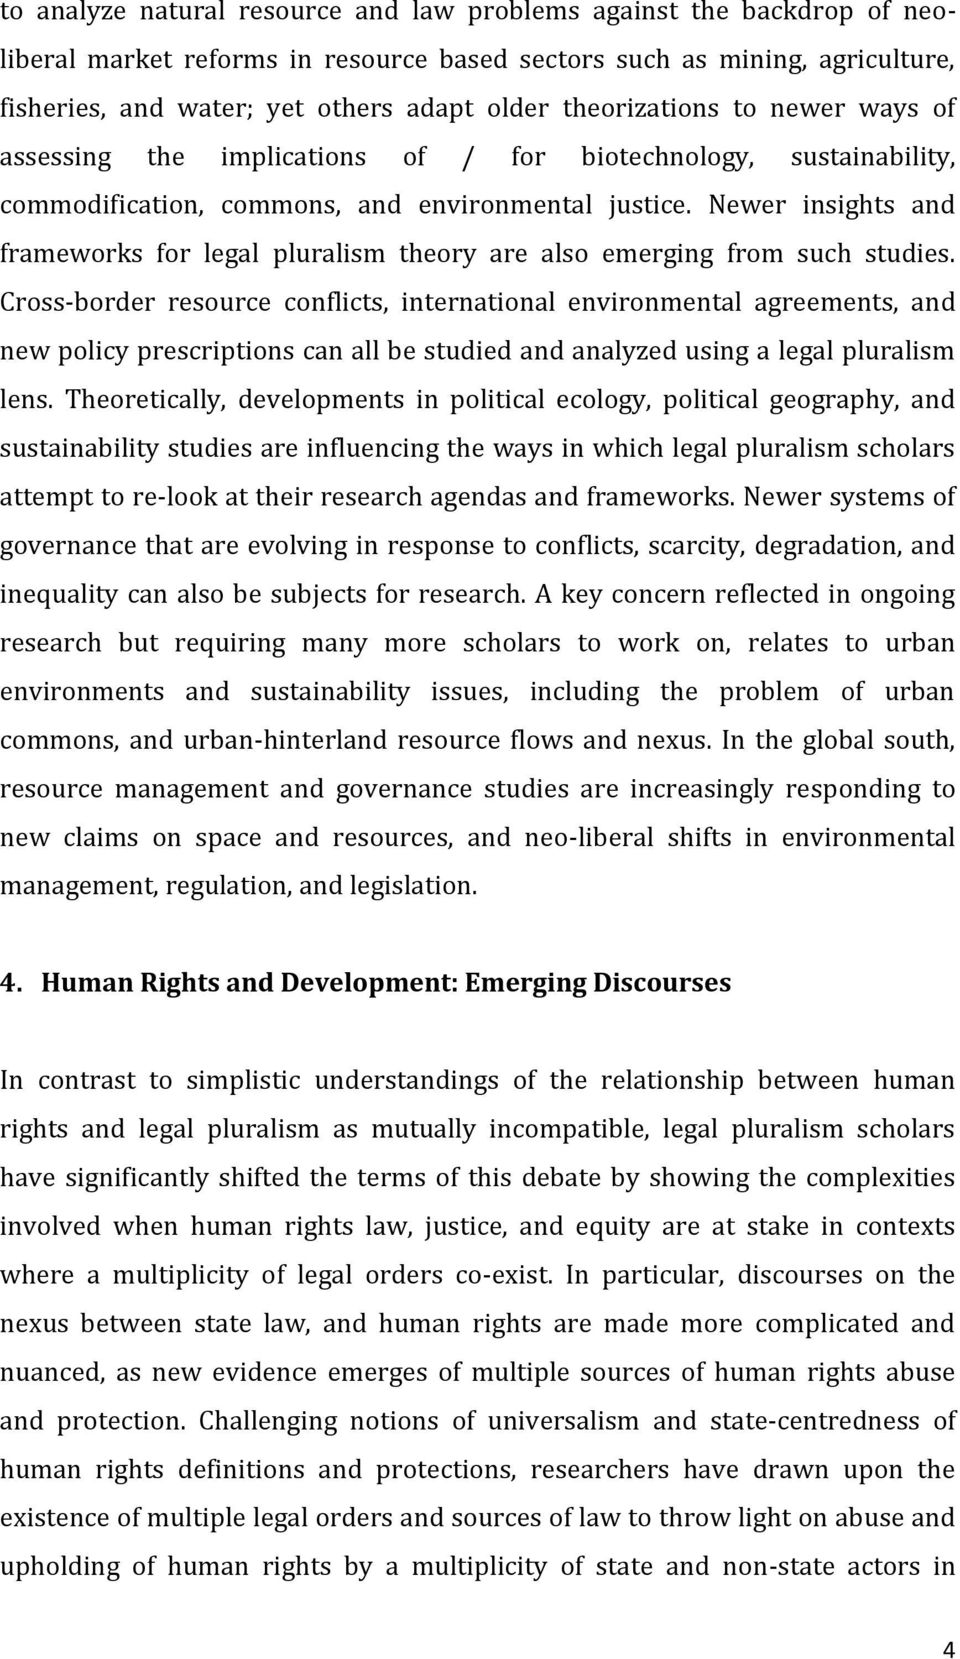 Newer insights and frameworks for legal pluralism theory are also emerging from such studies.